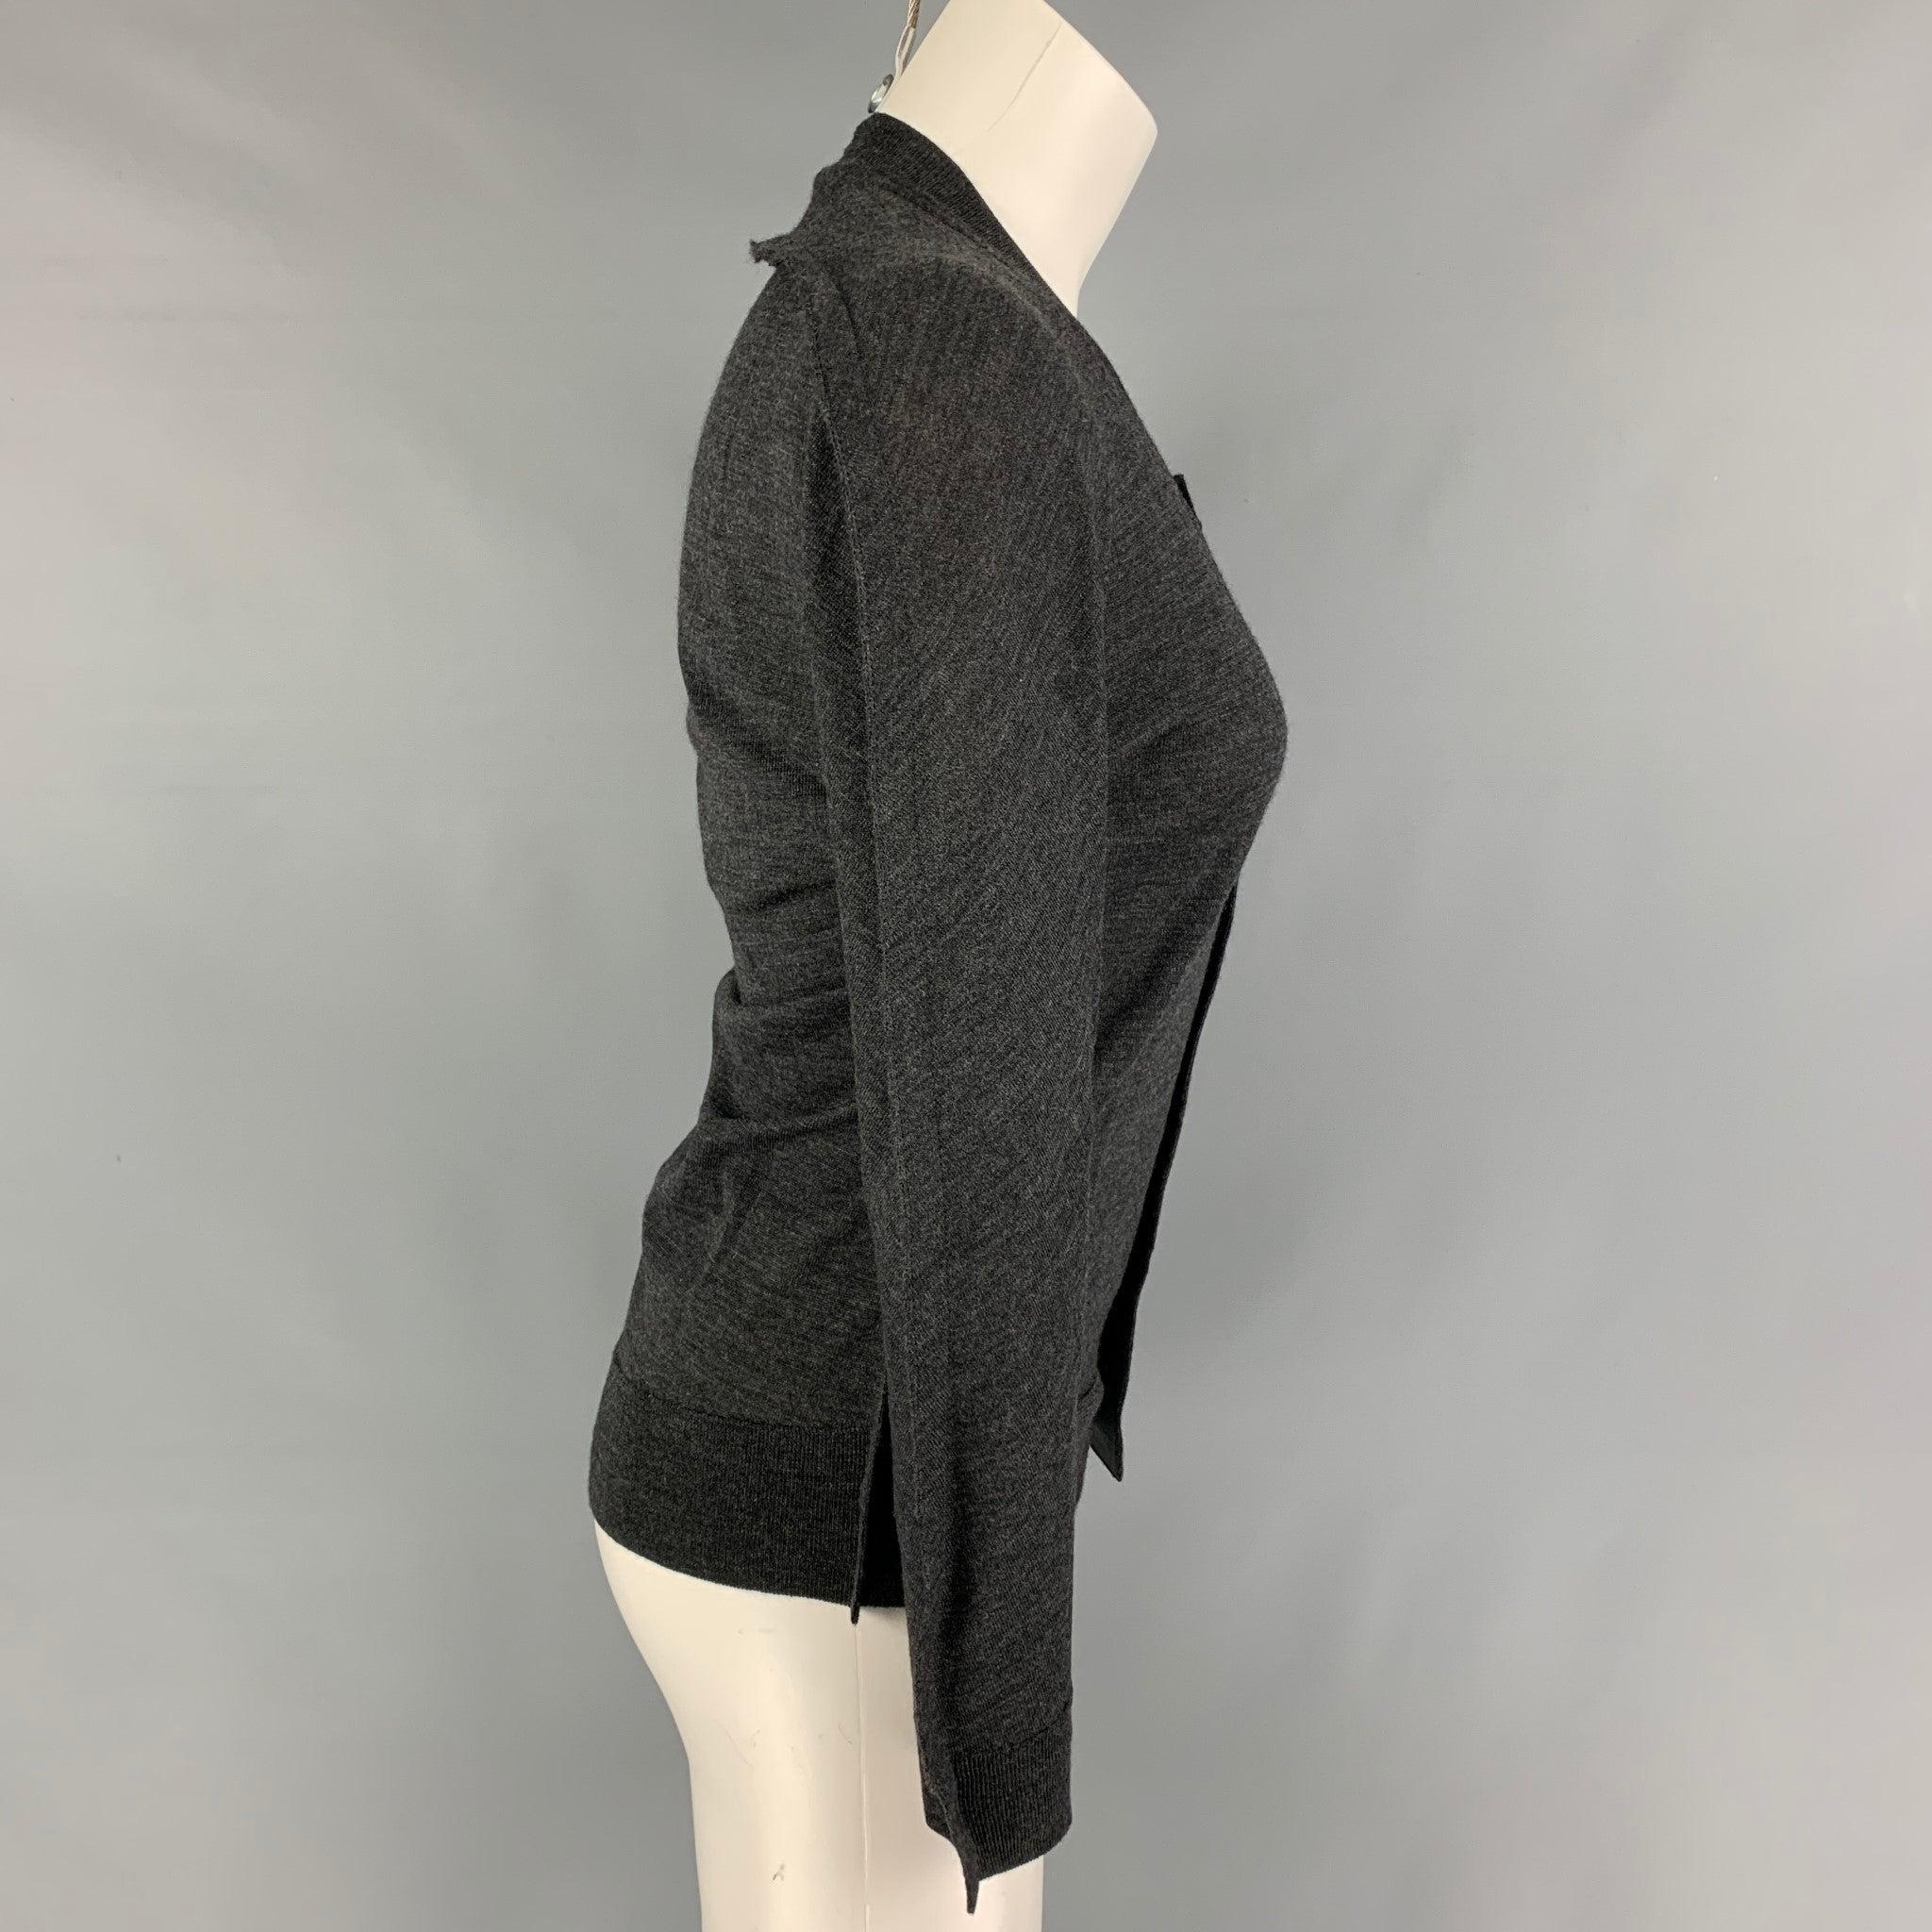 JUNYA WATANABE cardigan comes in a grey heather wool featuring structured sleeves and a buttoned closure. Made in Japan.
Excellent
Pre-Owned Condition. 

Marked:   S 

Measurements: 
 
Shoulder: 15.5 inches Bust: 34 inches Sleeve: 21 inches Length: